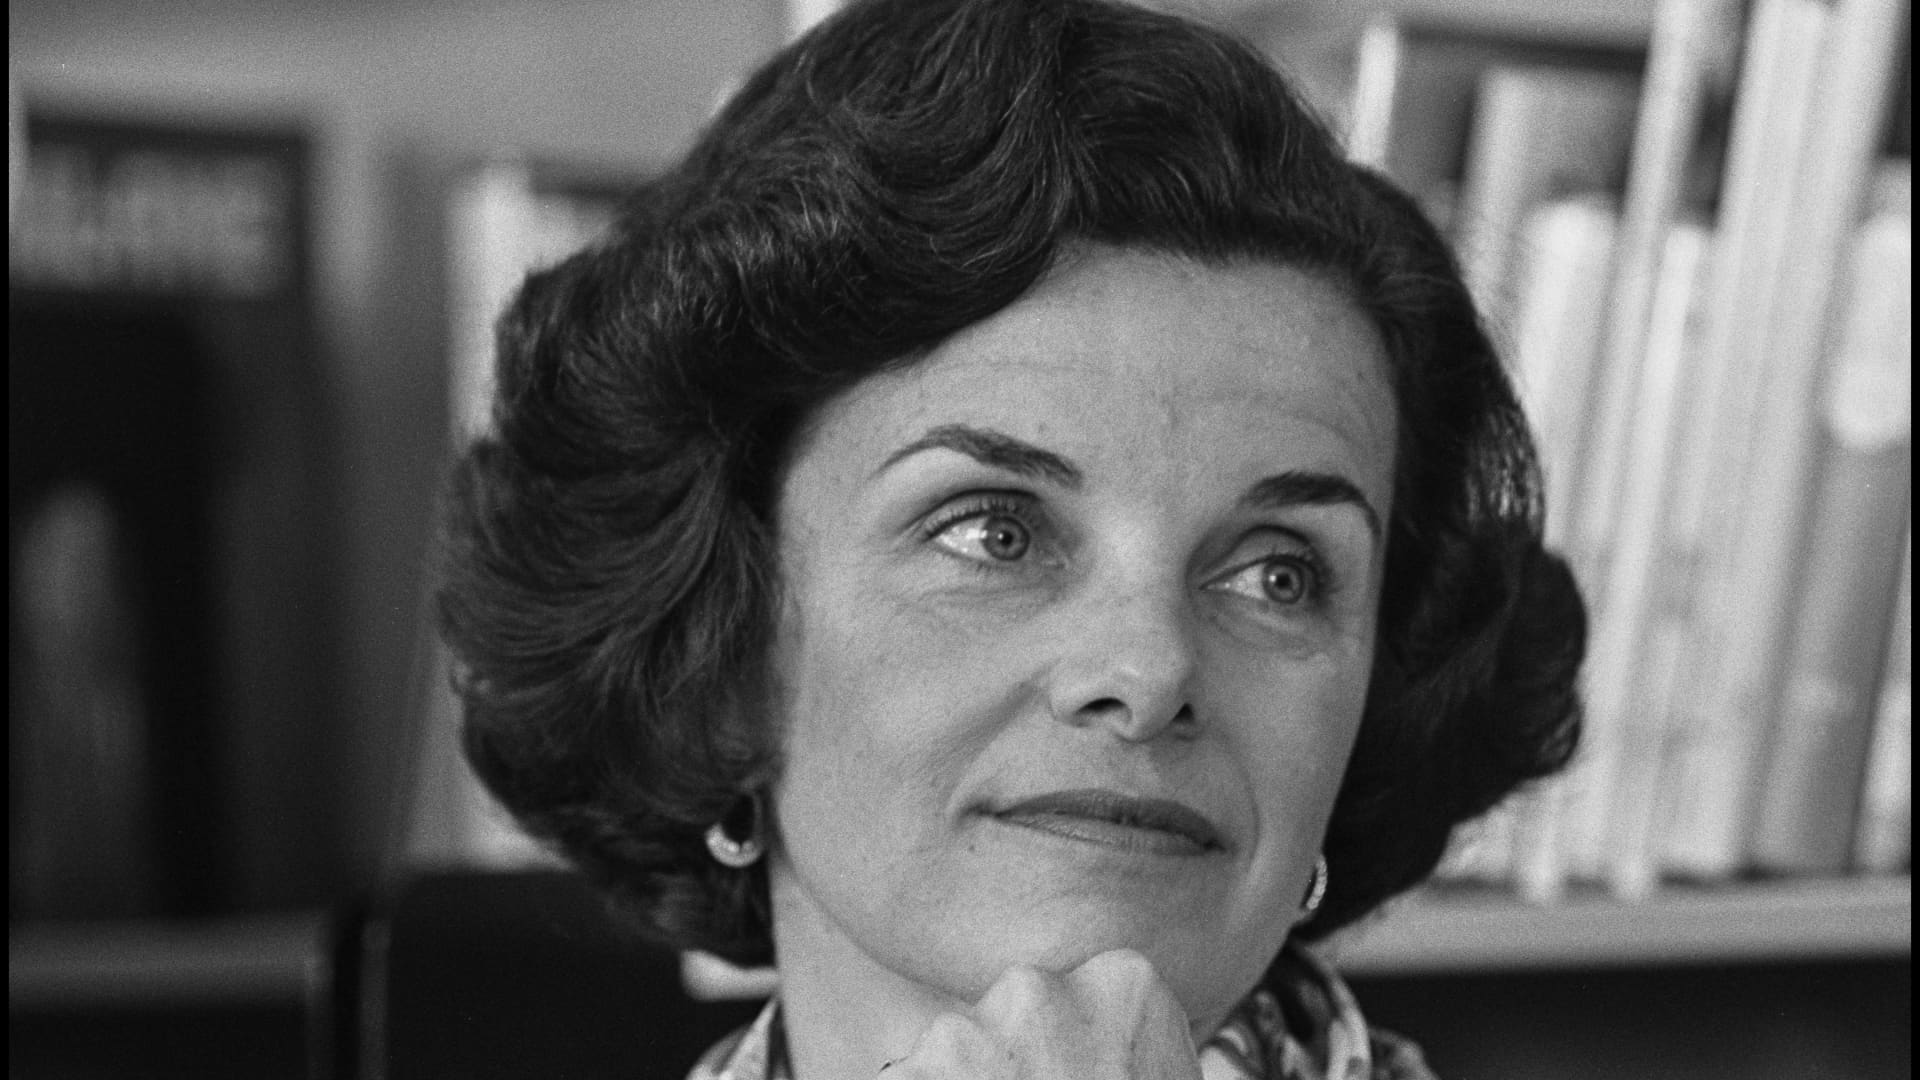 Close-up of American politician San Francisco Board of Supervisors member (and future US Senator) Dianne Feinstein as she attends a Candidates' Day event at the Douglas School, San Francisco, California, September 1979. 